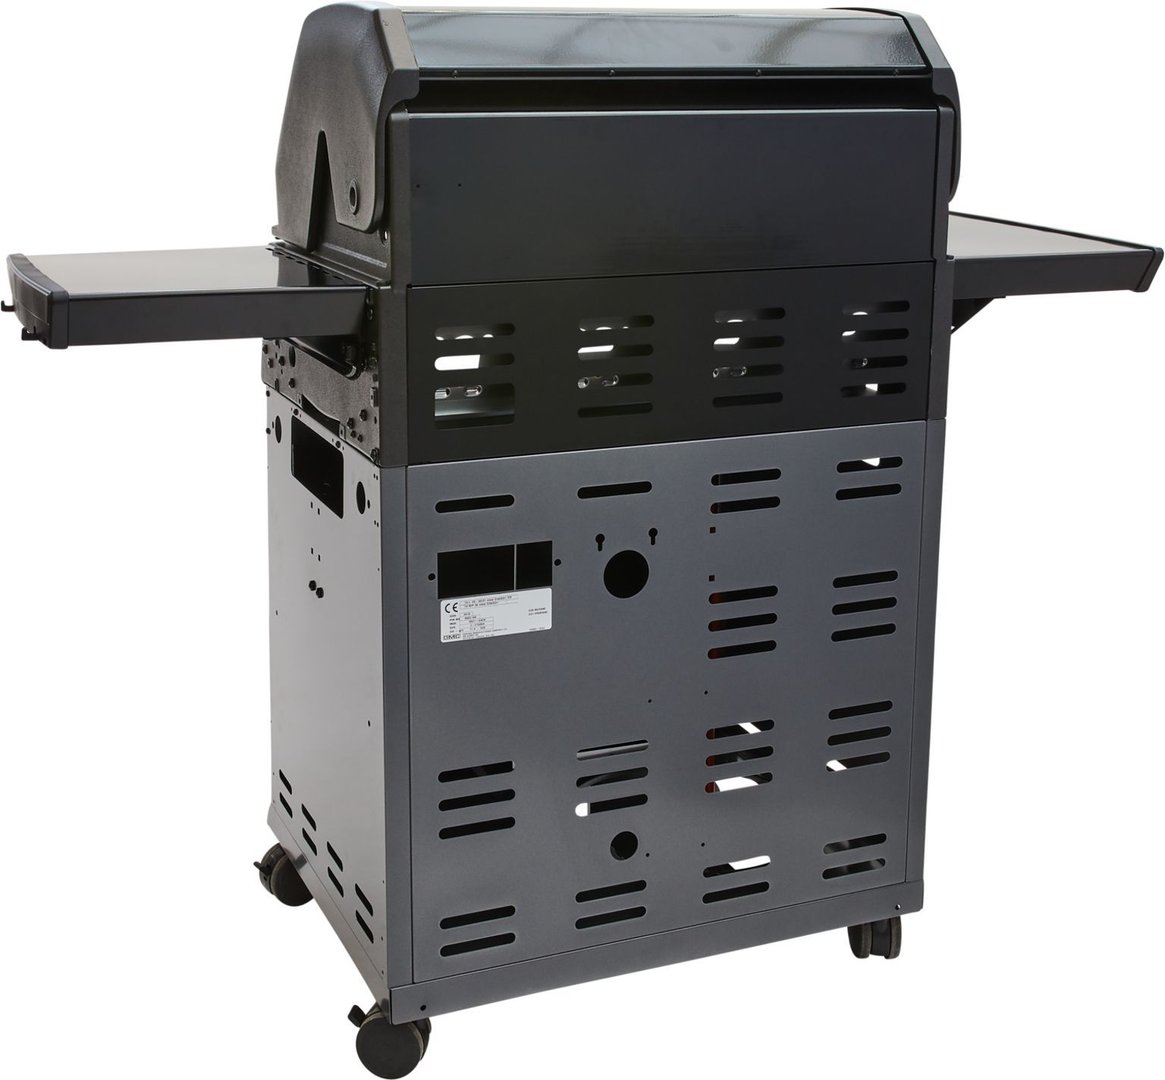 BROIL KING CROWN 420 Gas Grill 4 Burners | Broil-king| Image 4